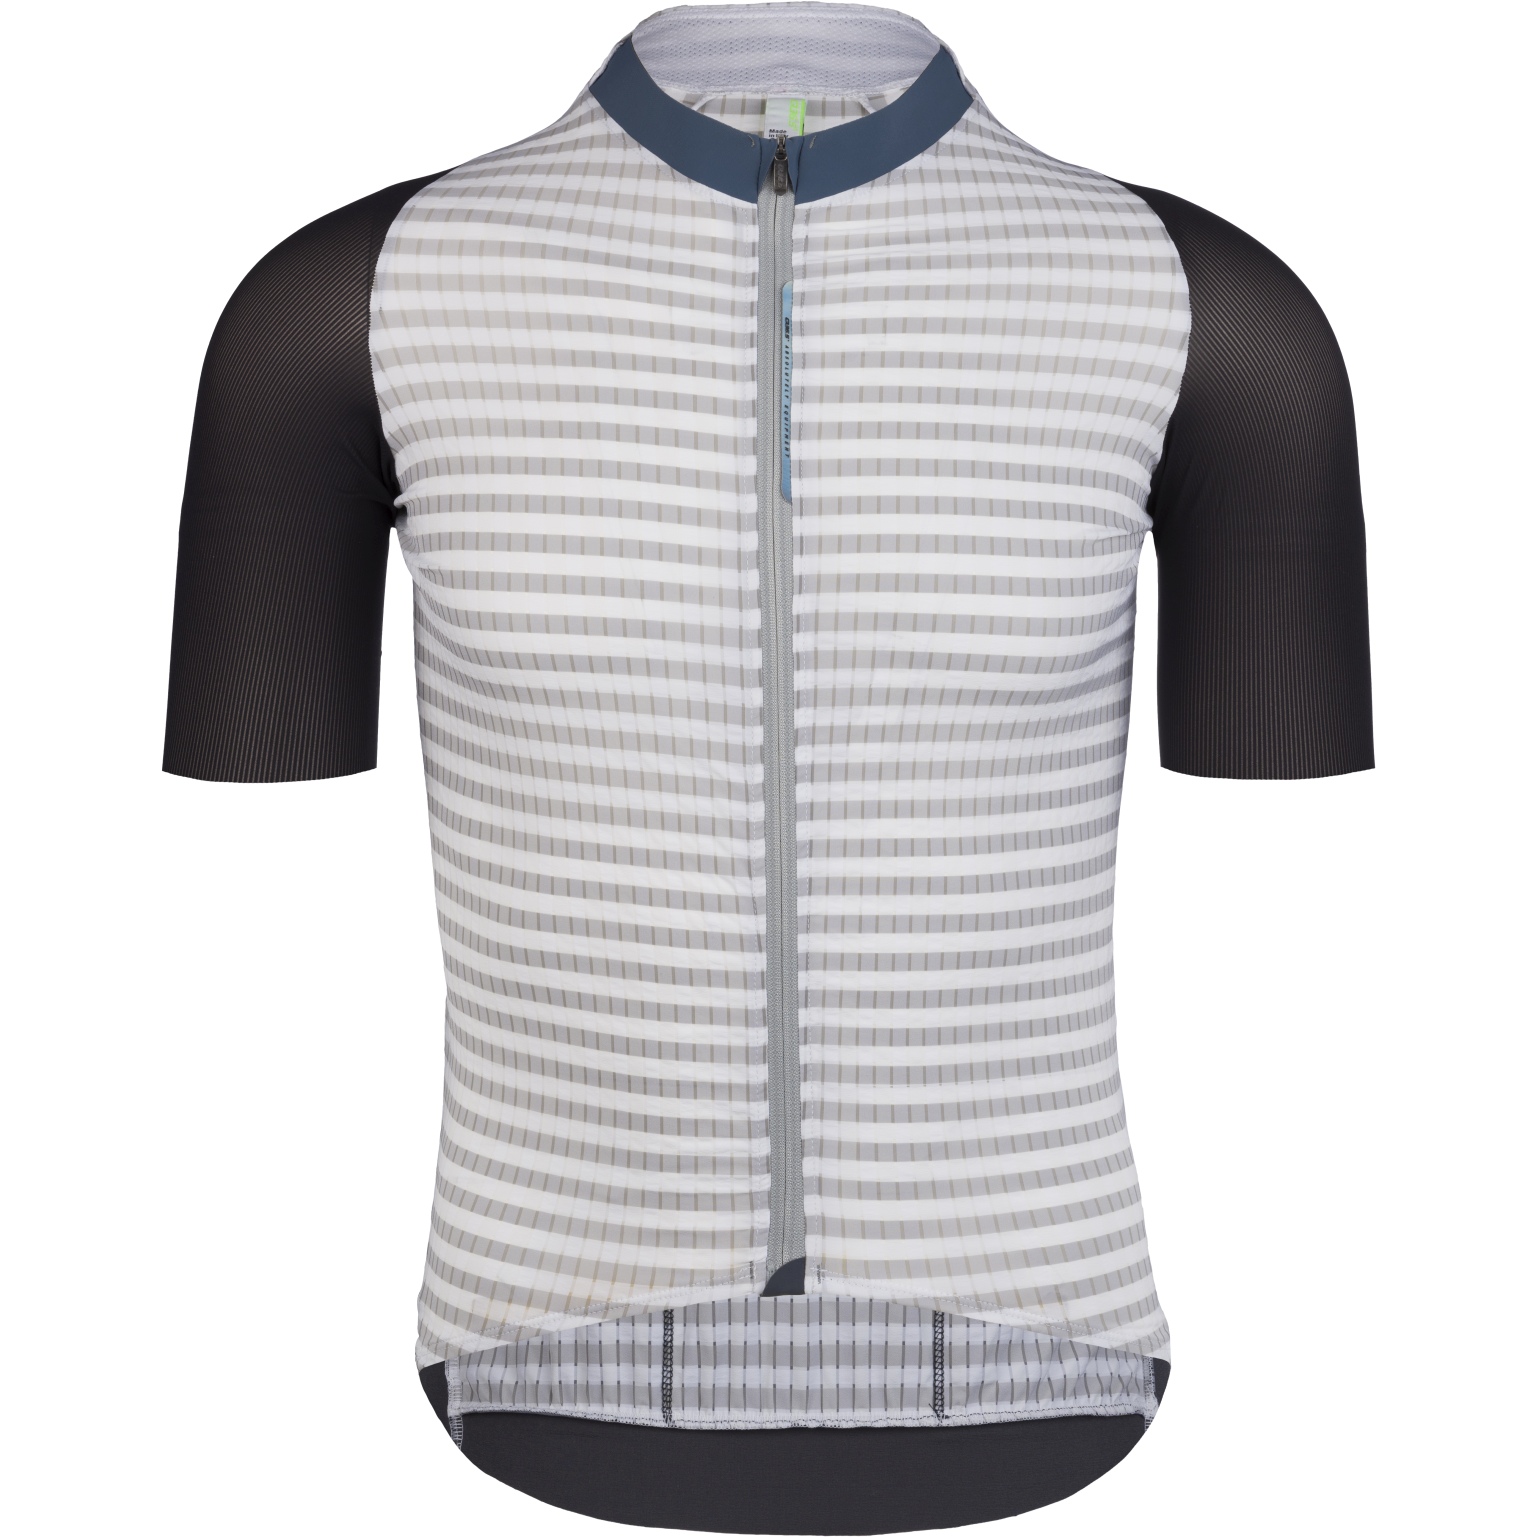 Picture of Q36.5 Clima Short Sleeve Jersey - white